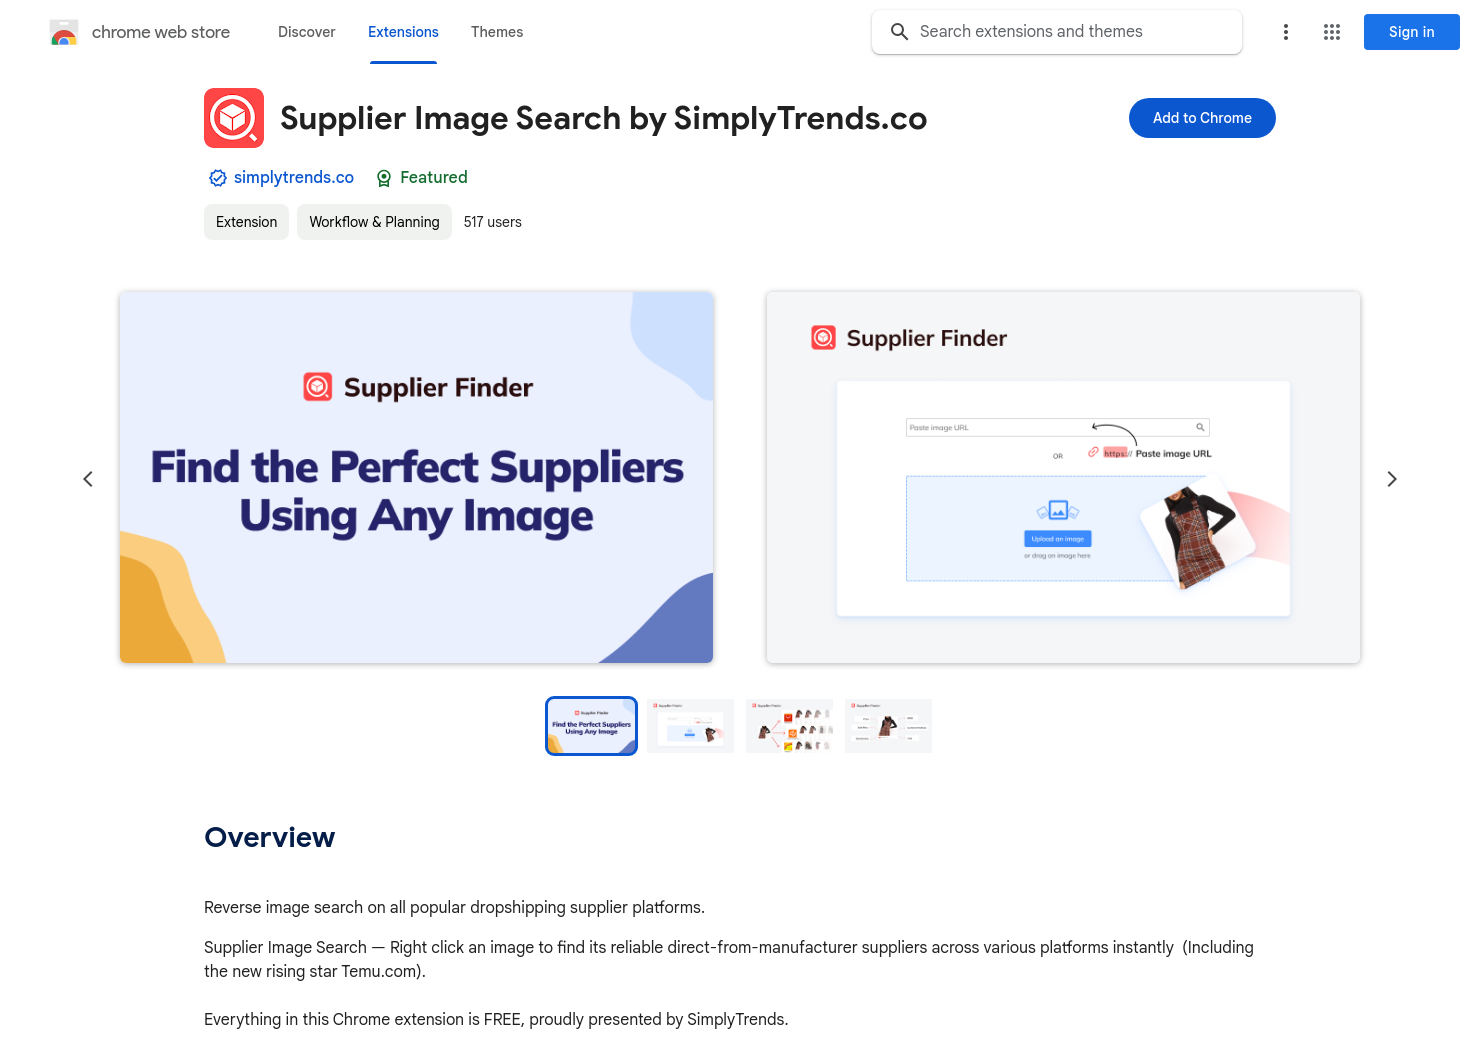 startuptile Supplier Image Search-Image search on all popular dropshipping supplier platforms